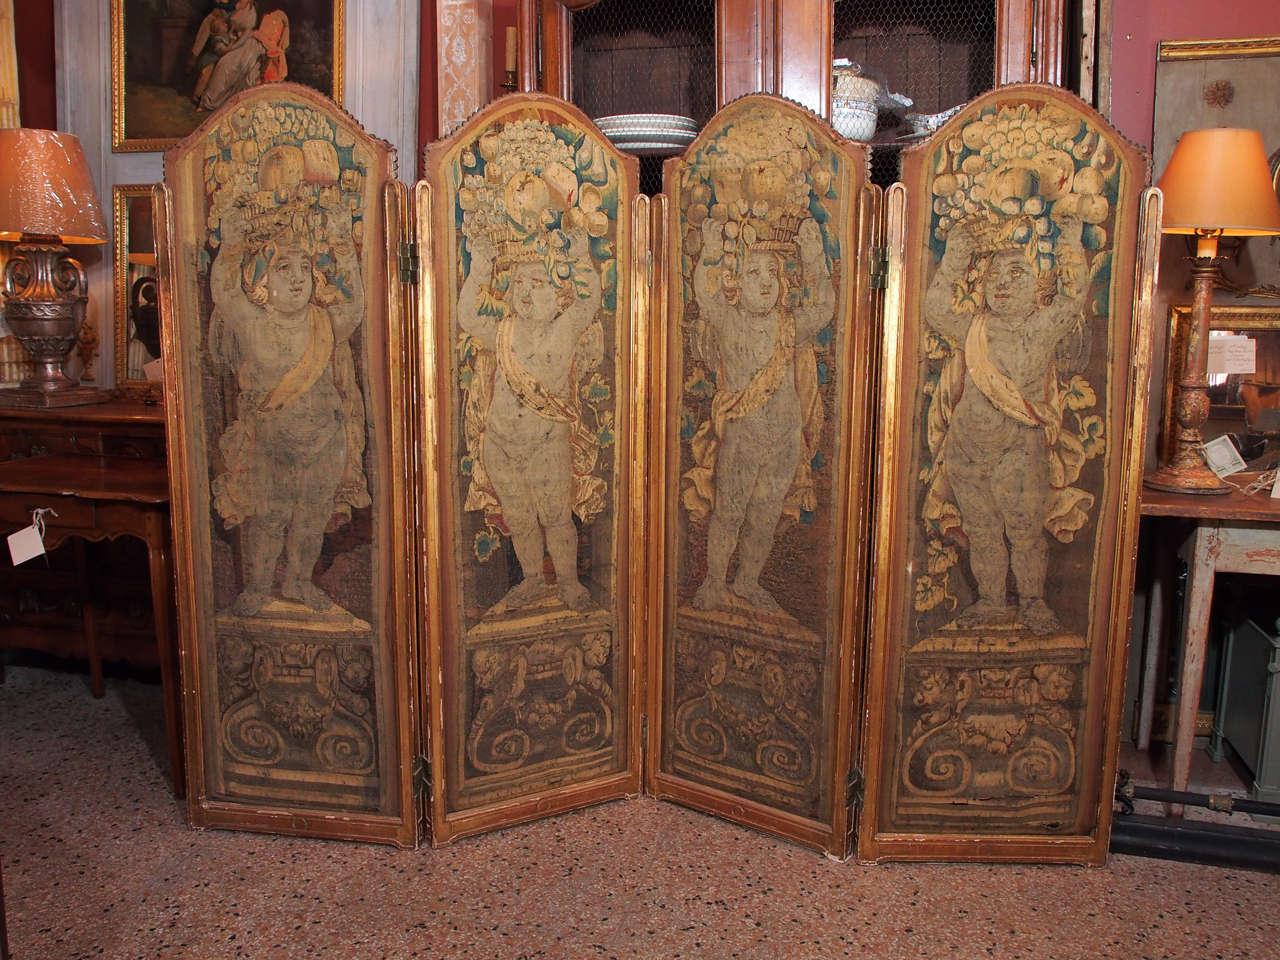 Four polychrome Aubusson wool panels. Each panel is in a giltwood frame and conical tacks holds the tapestry at the top. Each panel features a putto standing on a plinth and holding a basket of fruits on its head.